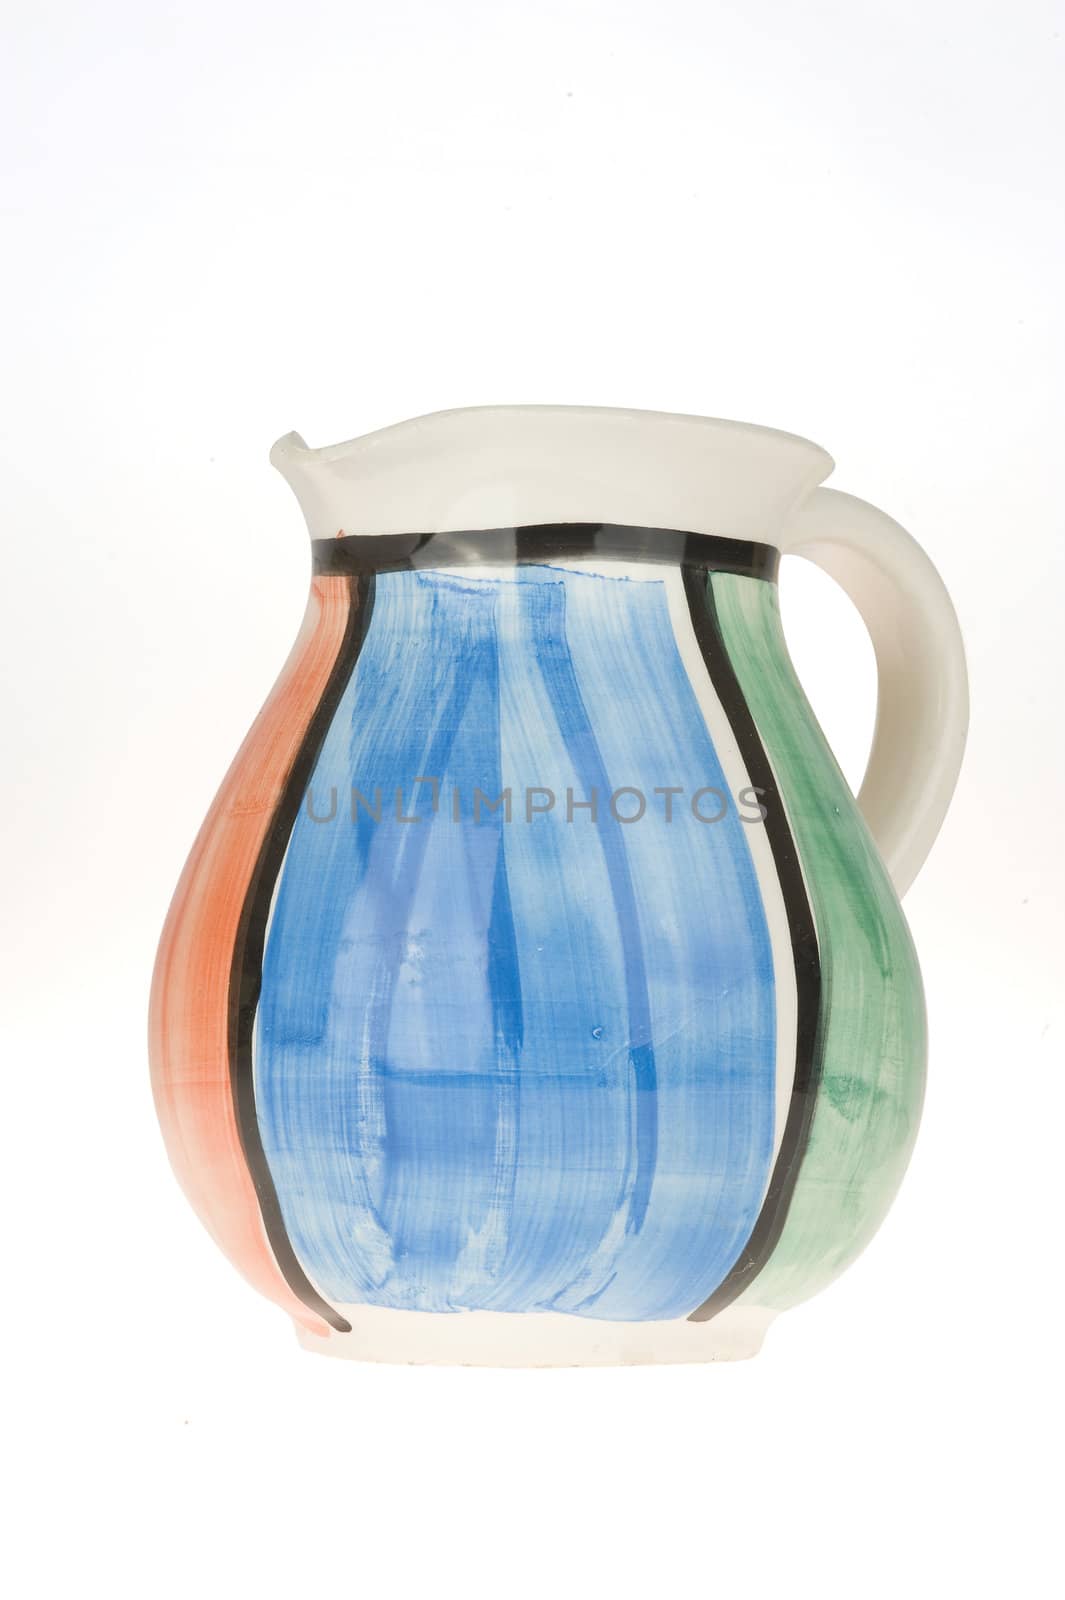 a colorful milk jug on white